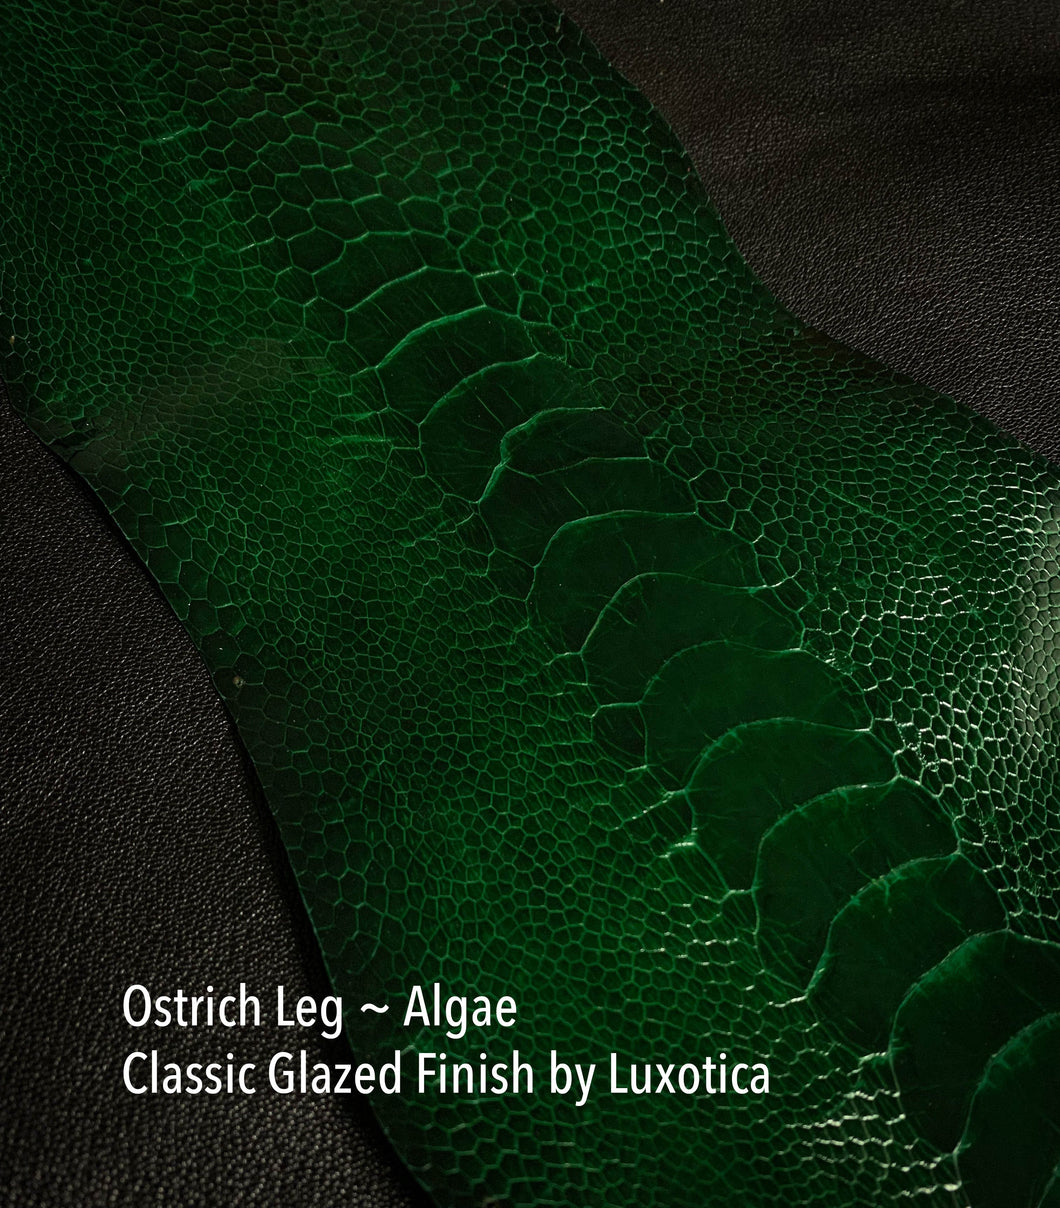 Ostrich Leg Classic Glazed by Luxotica - Colors